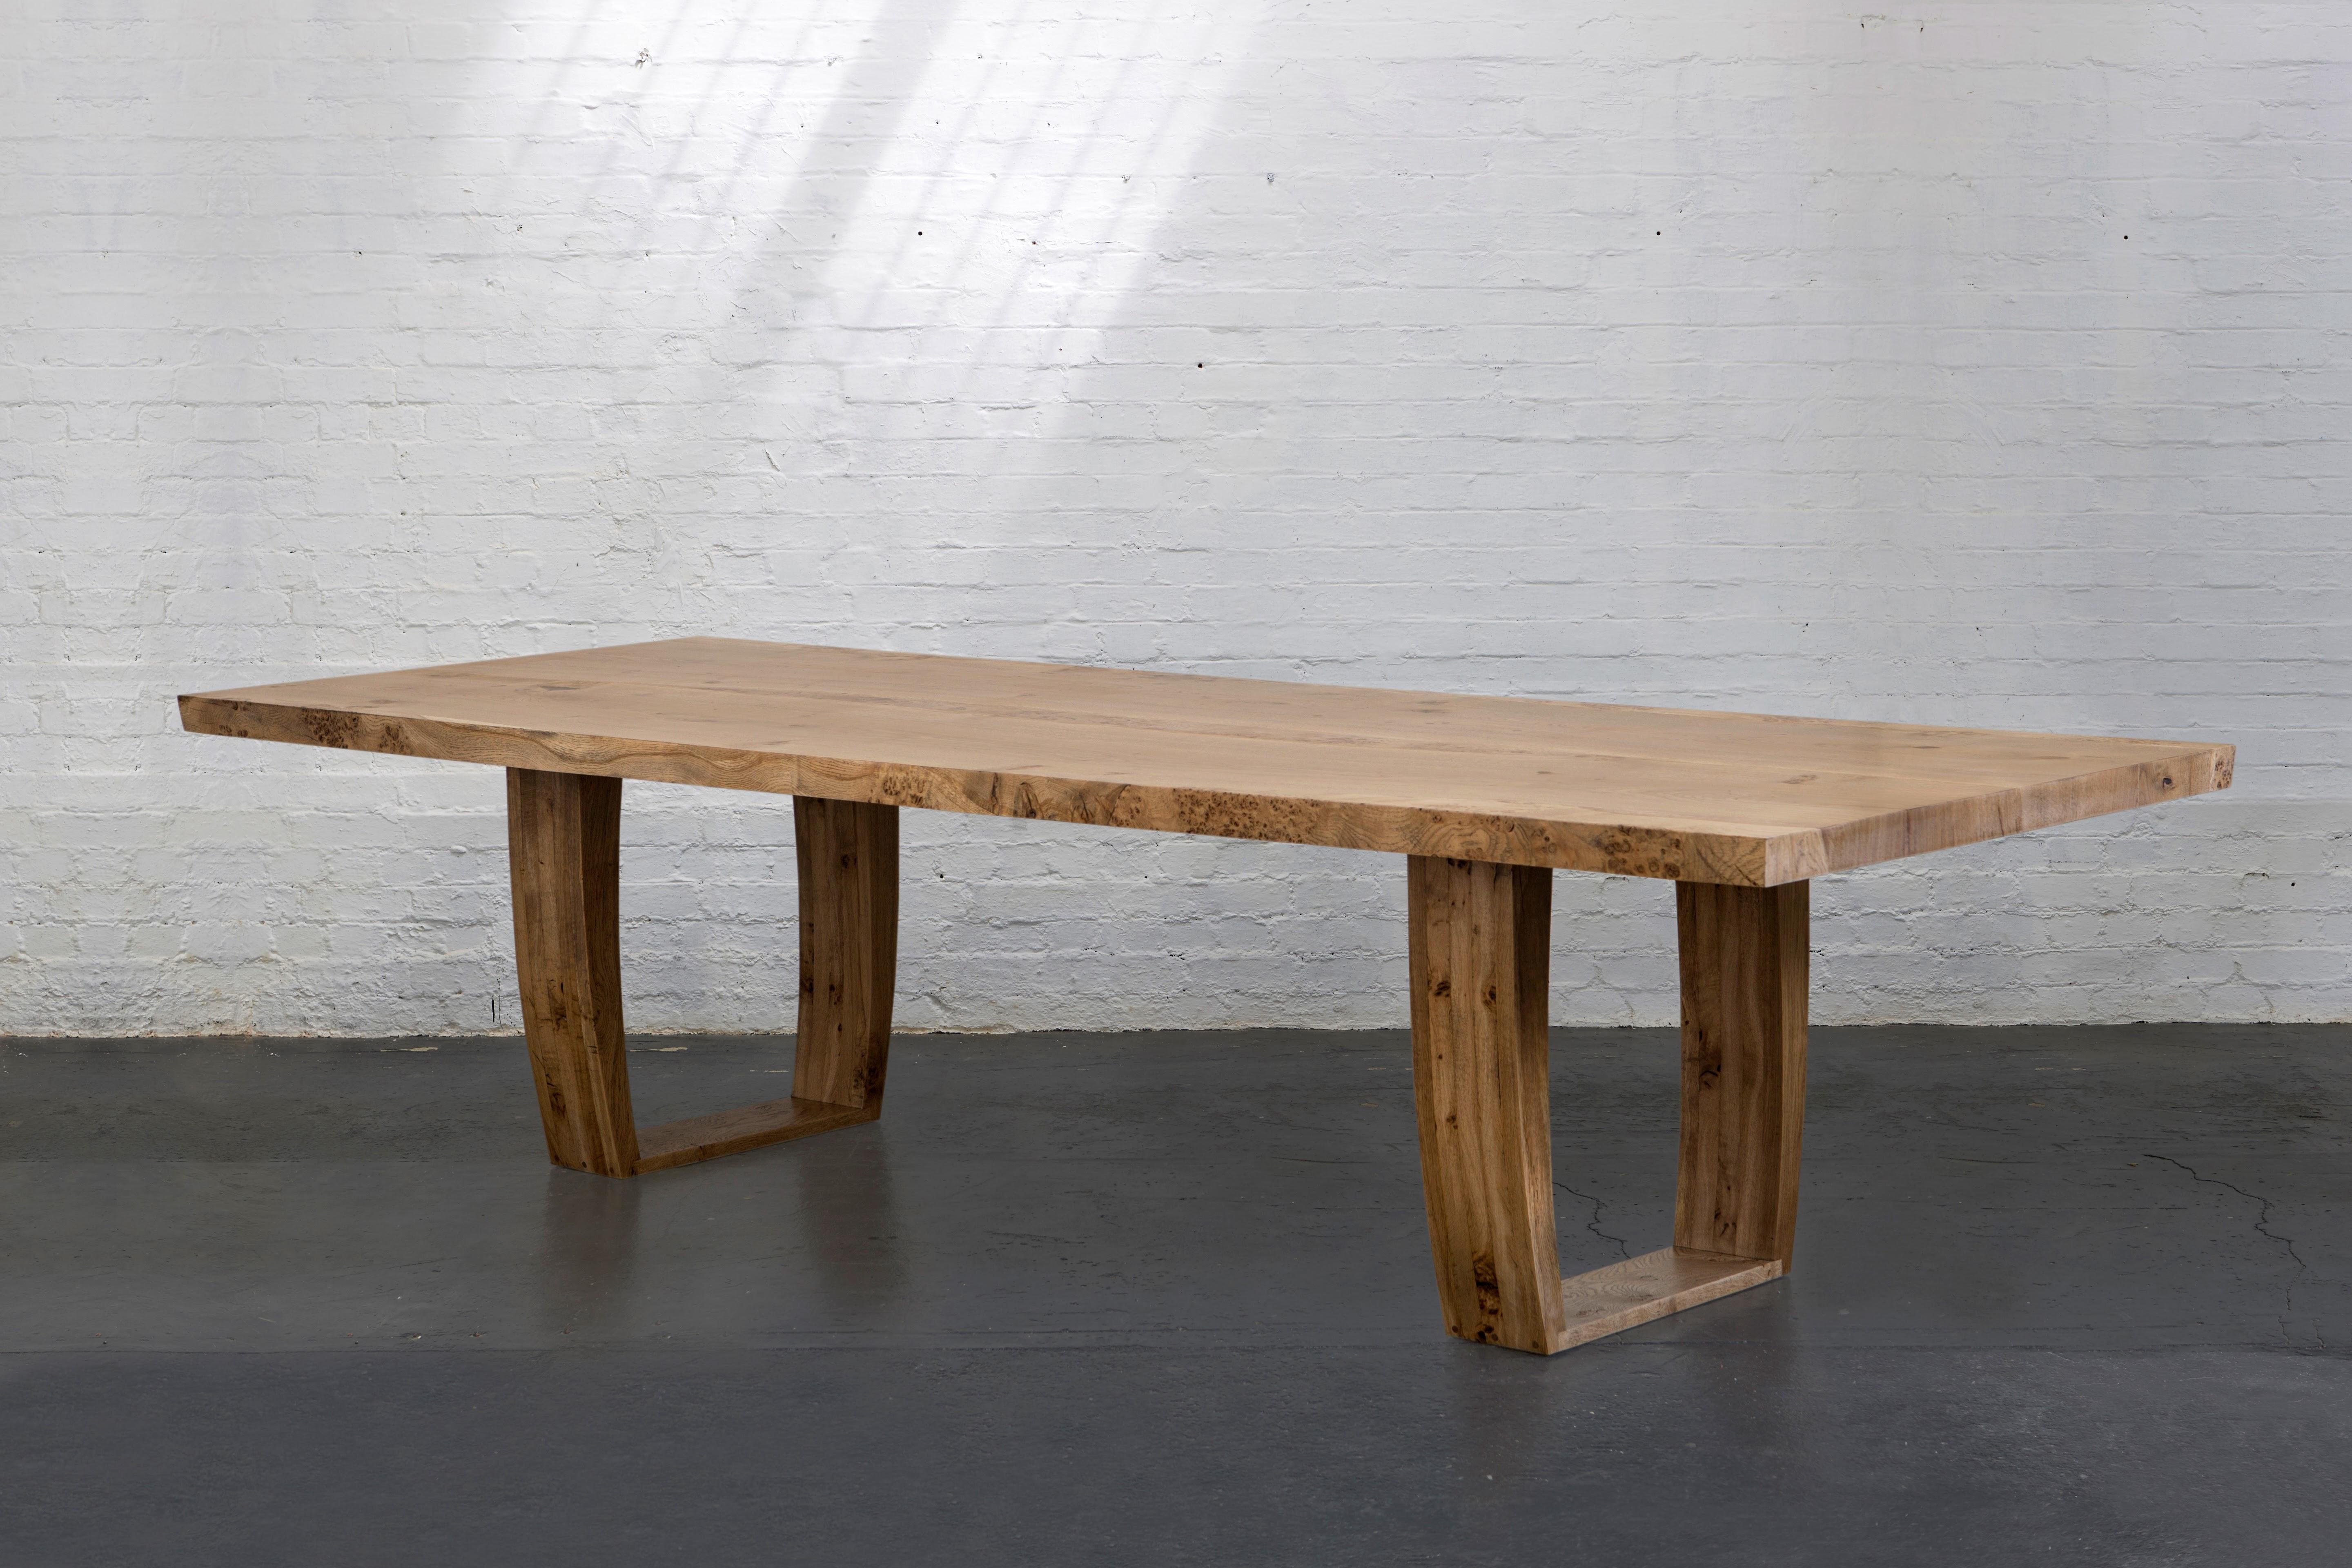 English oak table with handshake jointed tabletop, made from two pieces of oak with central infill of burr oak on monumental trapeze legs.

This is a custom made piece and can be made in different sizes and timbers. also with natural, bleached and